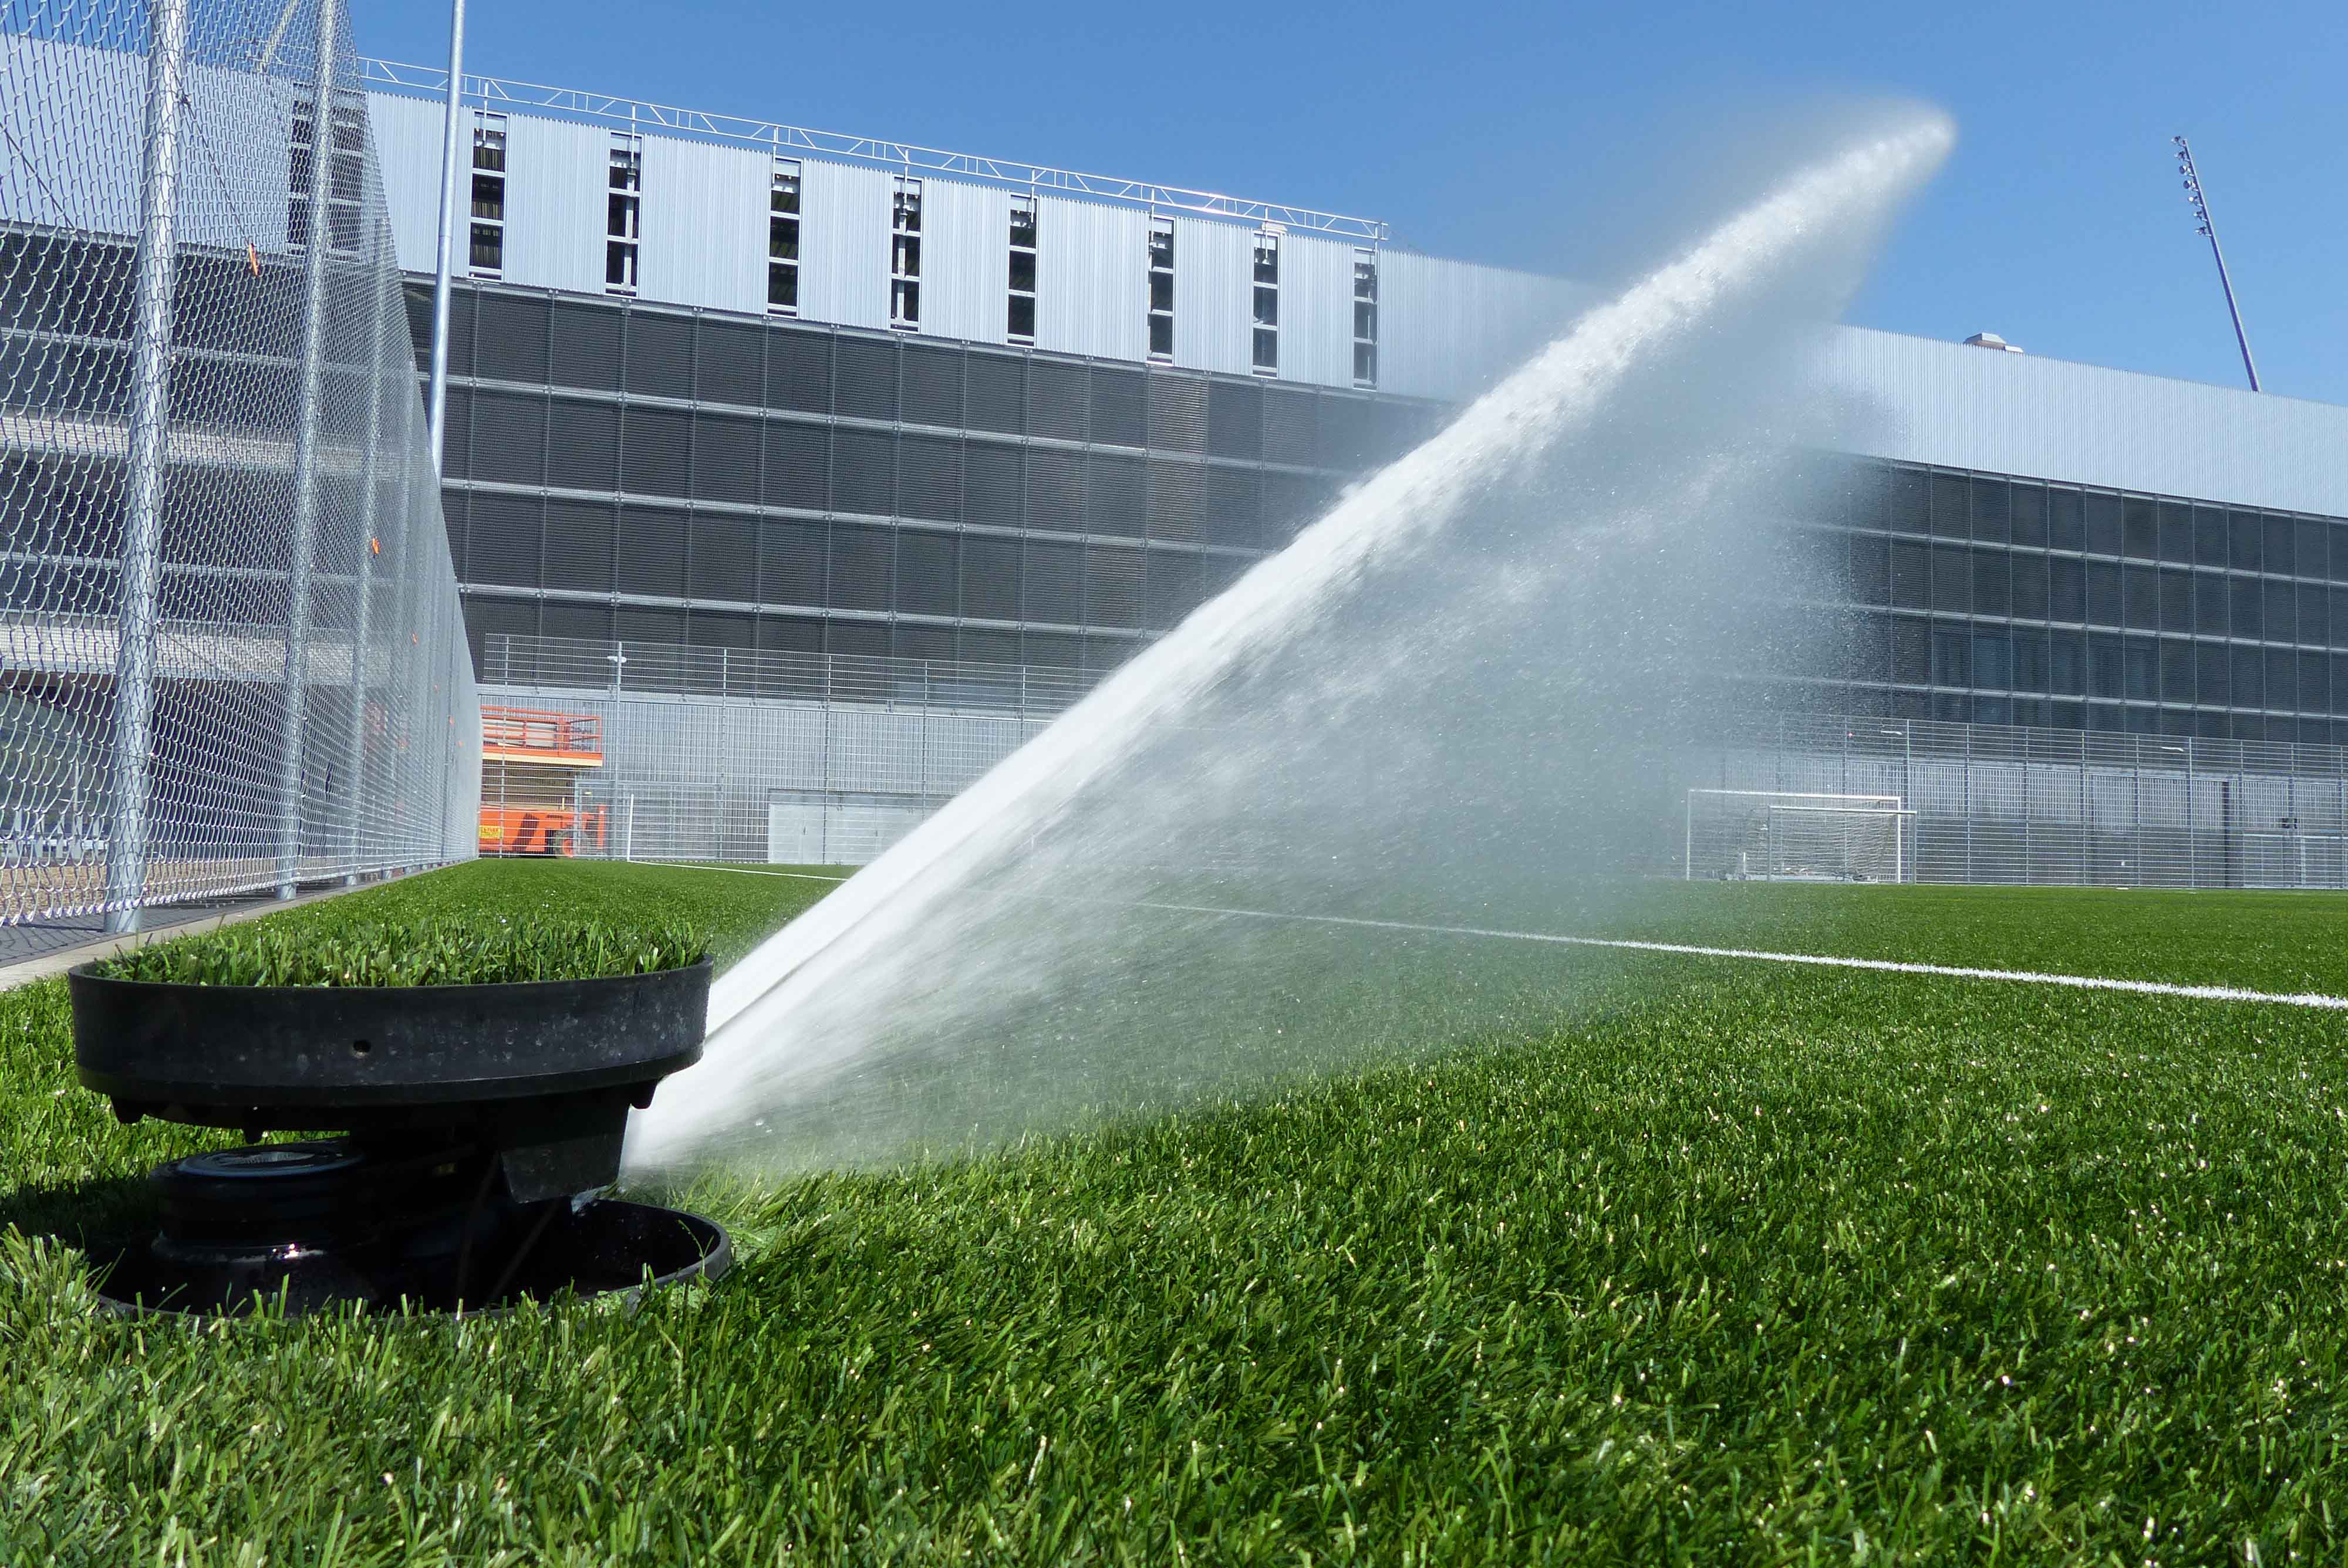 Perrot Sprinklers available in Australia following acquisition by The Toro Company